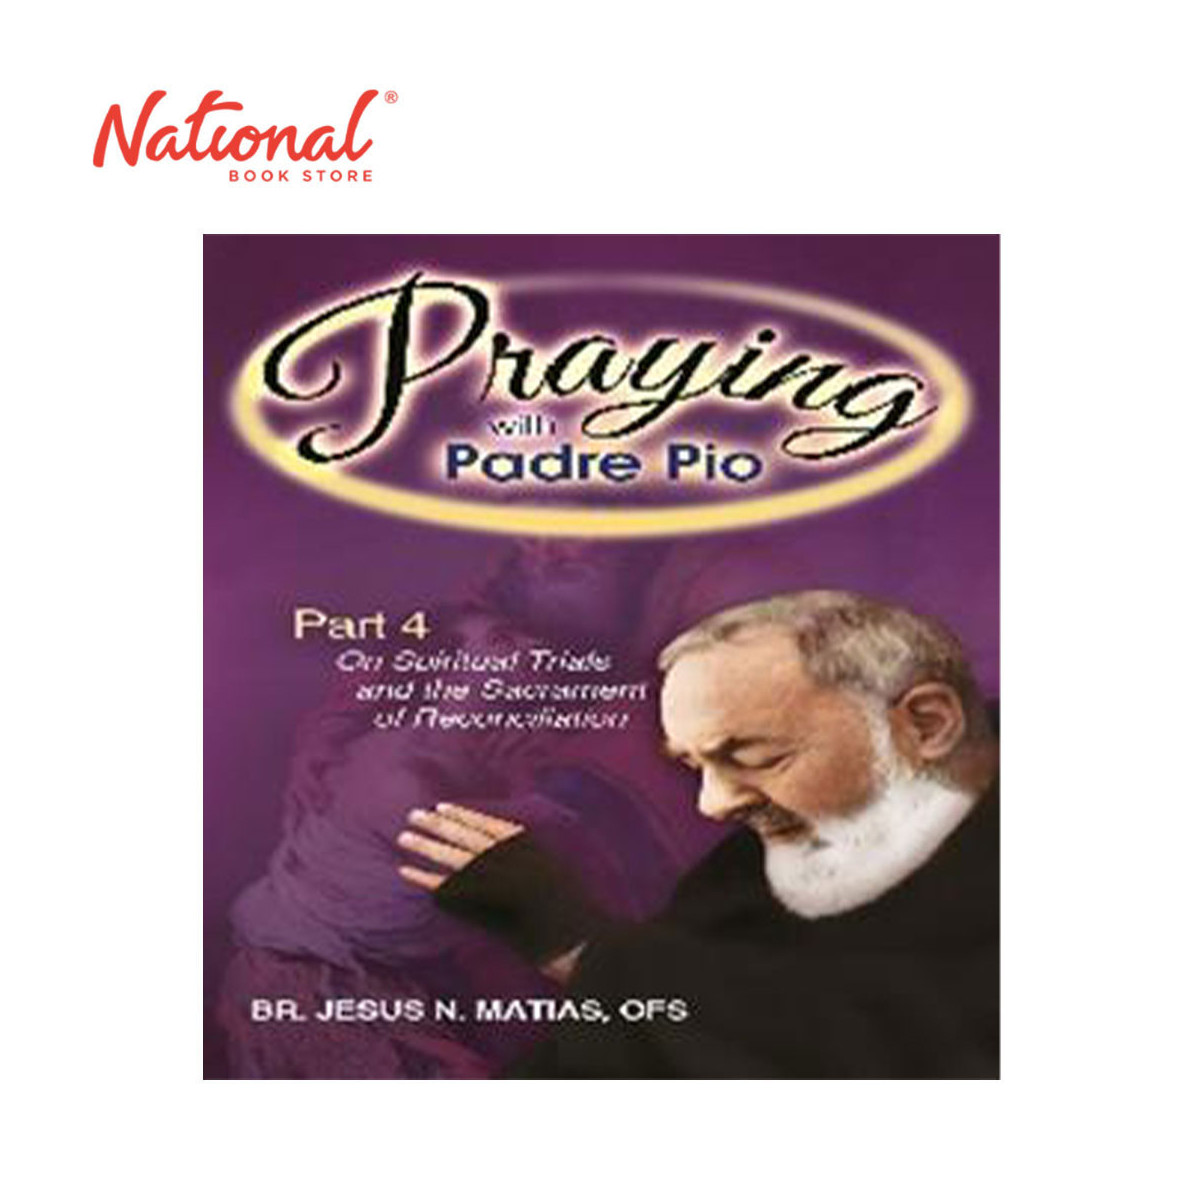 Praying With Padre Pio Part 4 Perfect Bound by Br. Jesus N. Matias - Trade Paperback - Devotionals